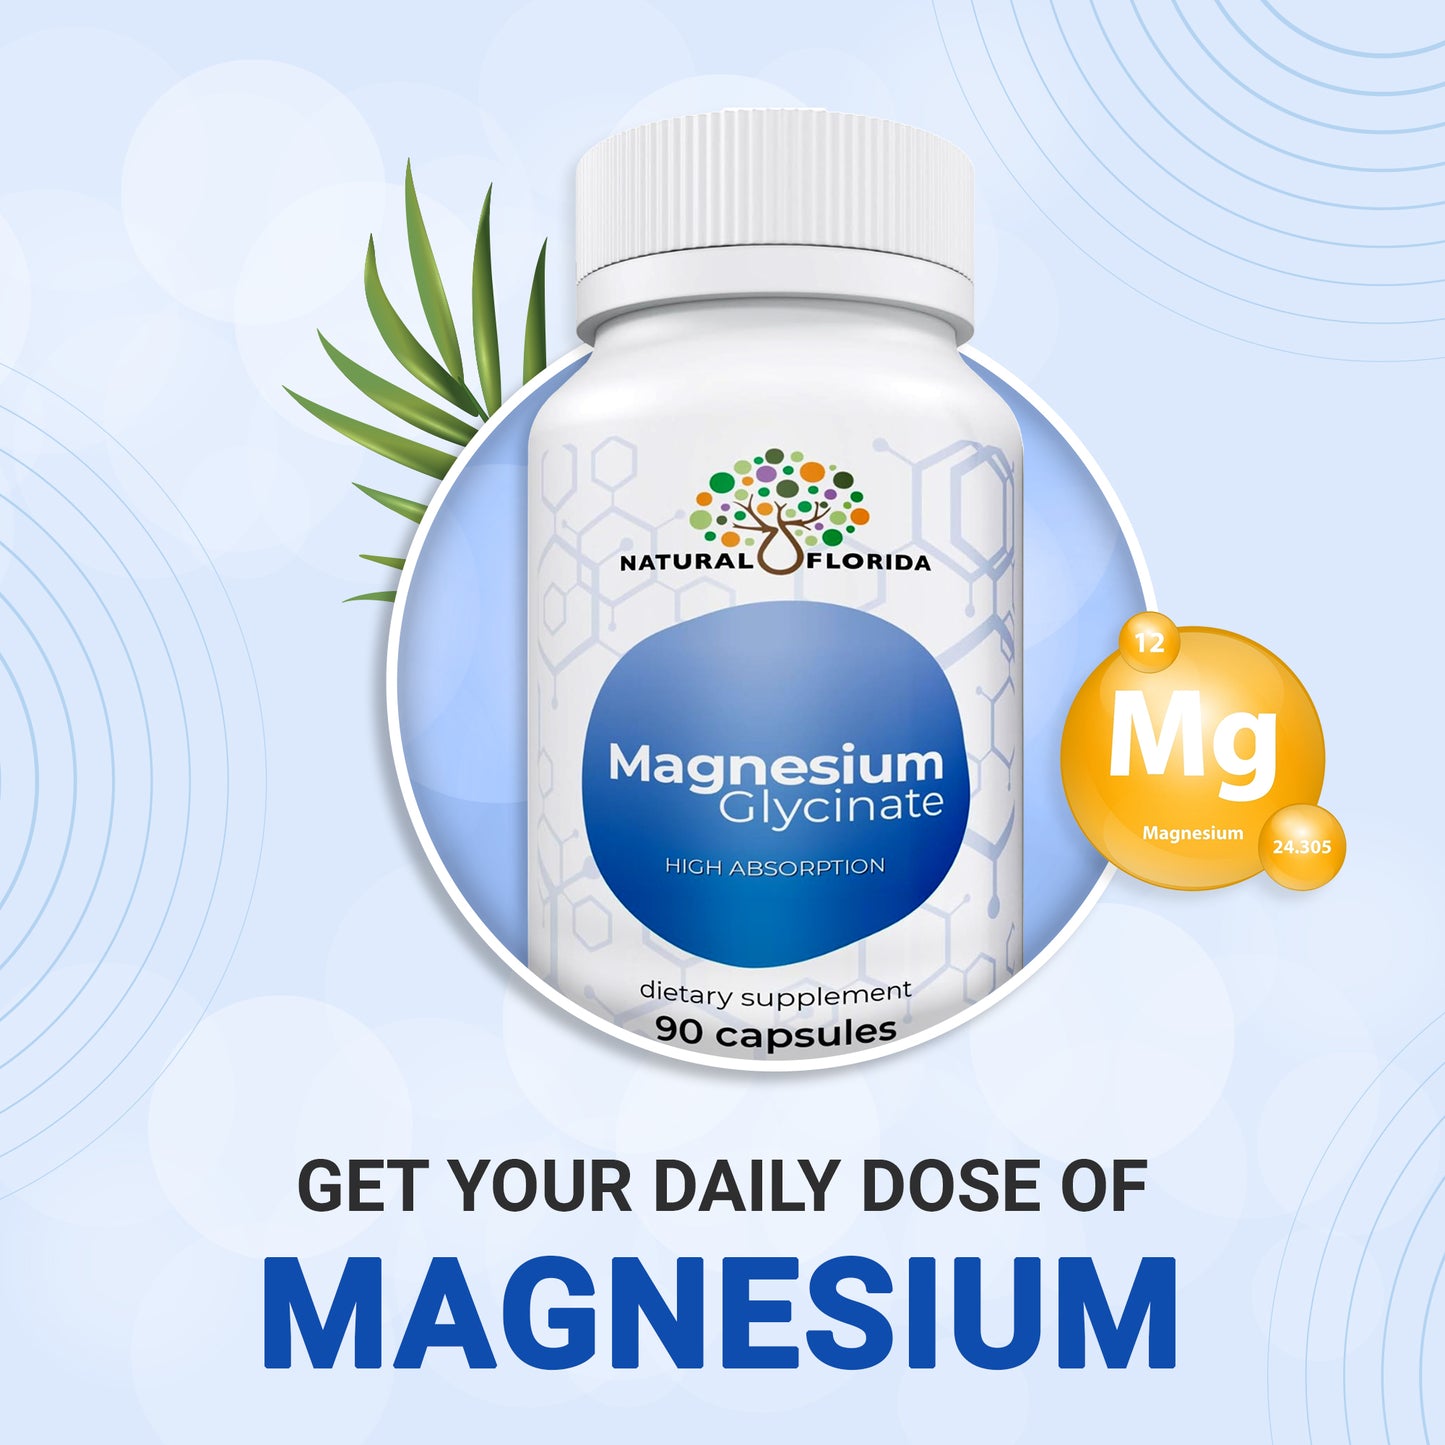 Magnesium Glycinate - Supplement to Support Stress Relief, Sleep, Heart Health, Nerves, Muscles, and Metabolism 90 Vegan Capsules - 220mg per serving